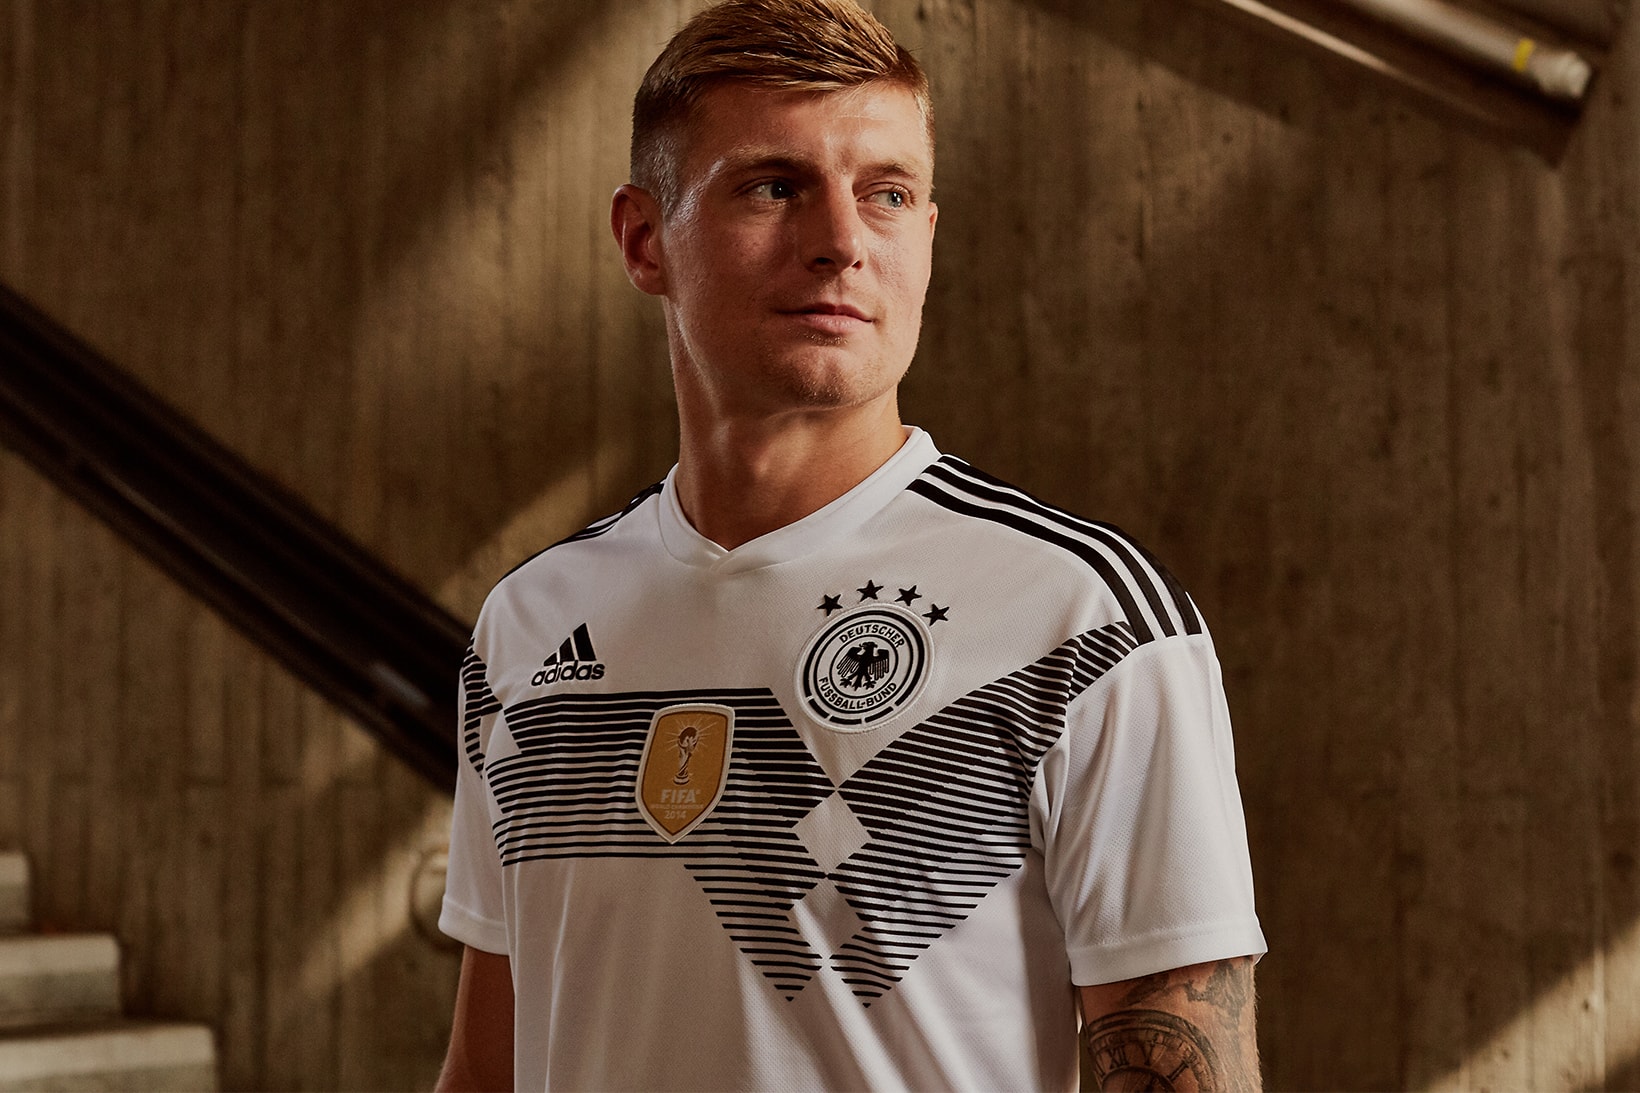 adidas 2018 World Cup Home Kits Russia Germany Spain Belgium Japan Colombia Argentina Mexico lionel messi jerseys fifa shirts